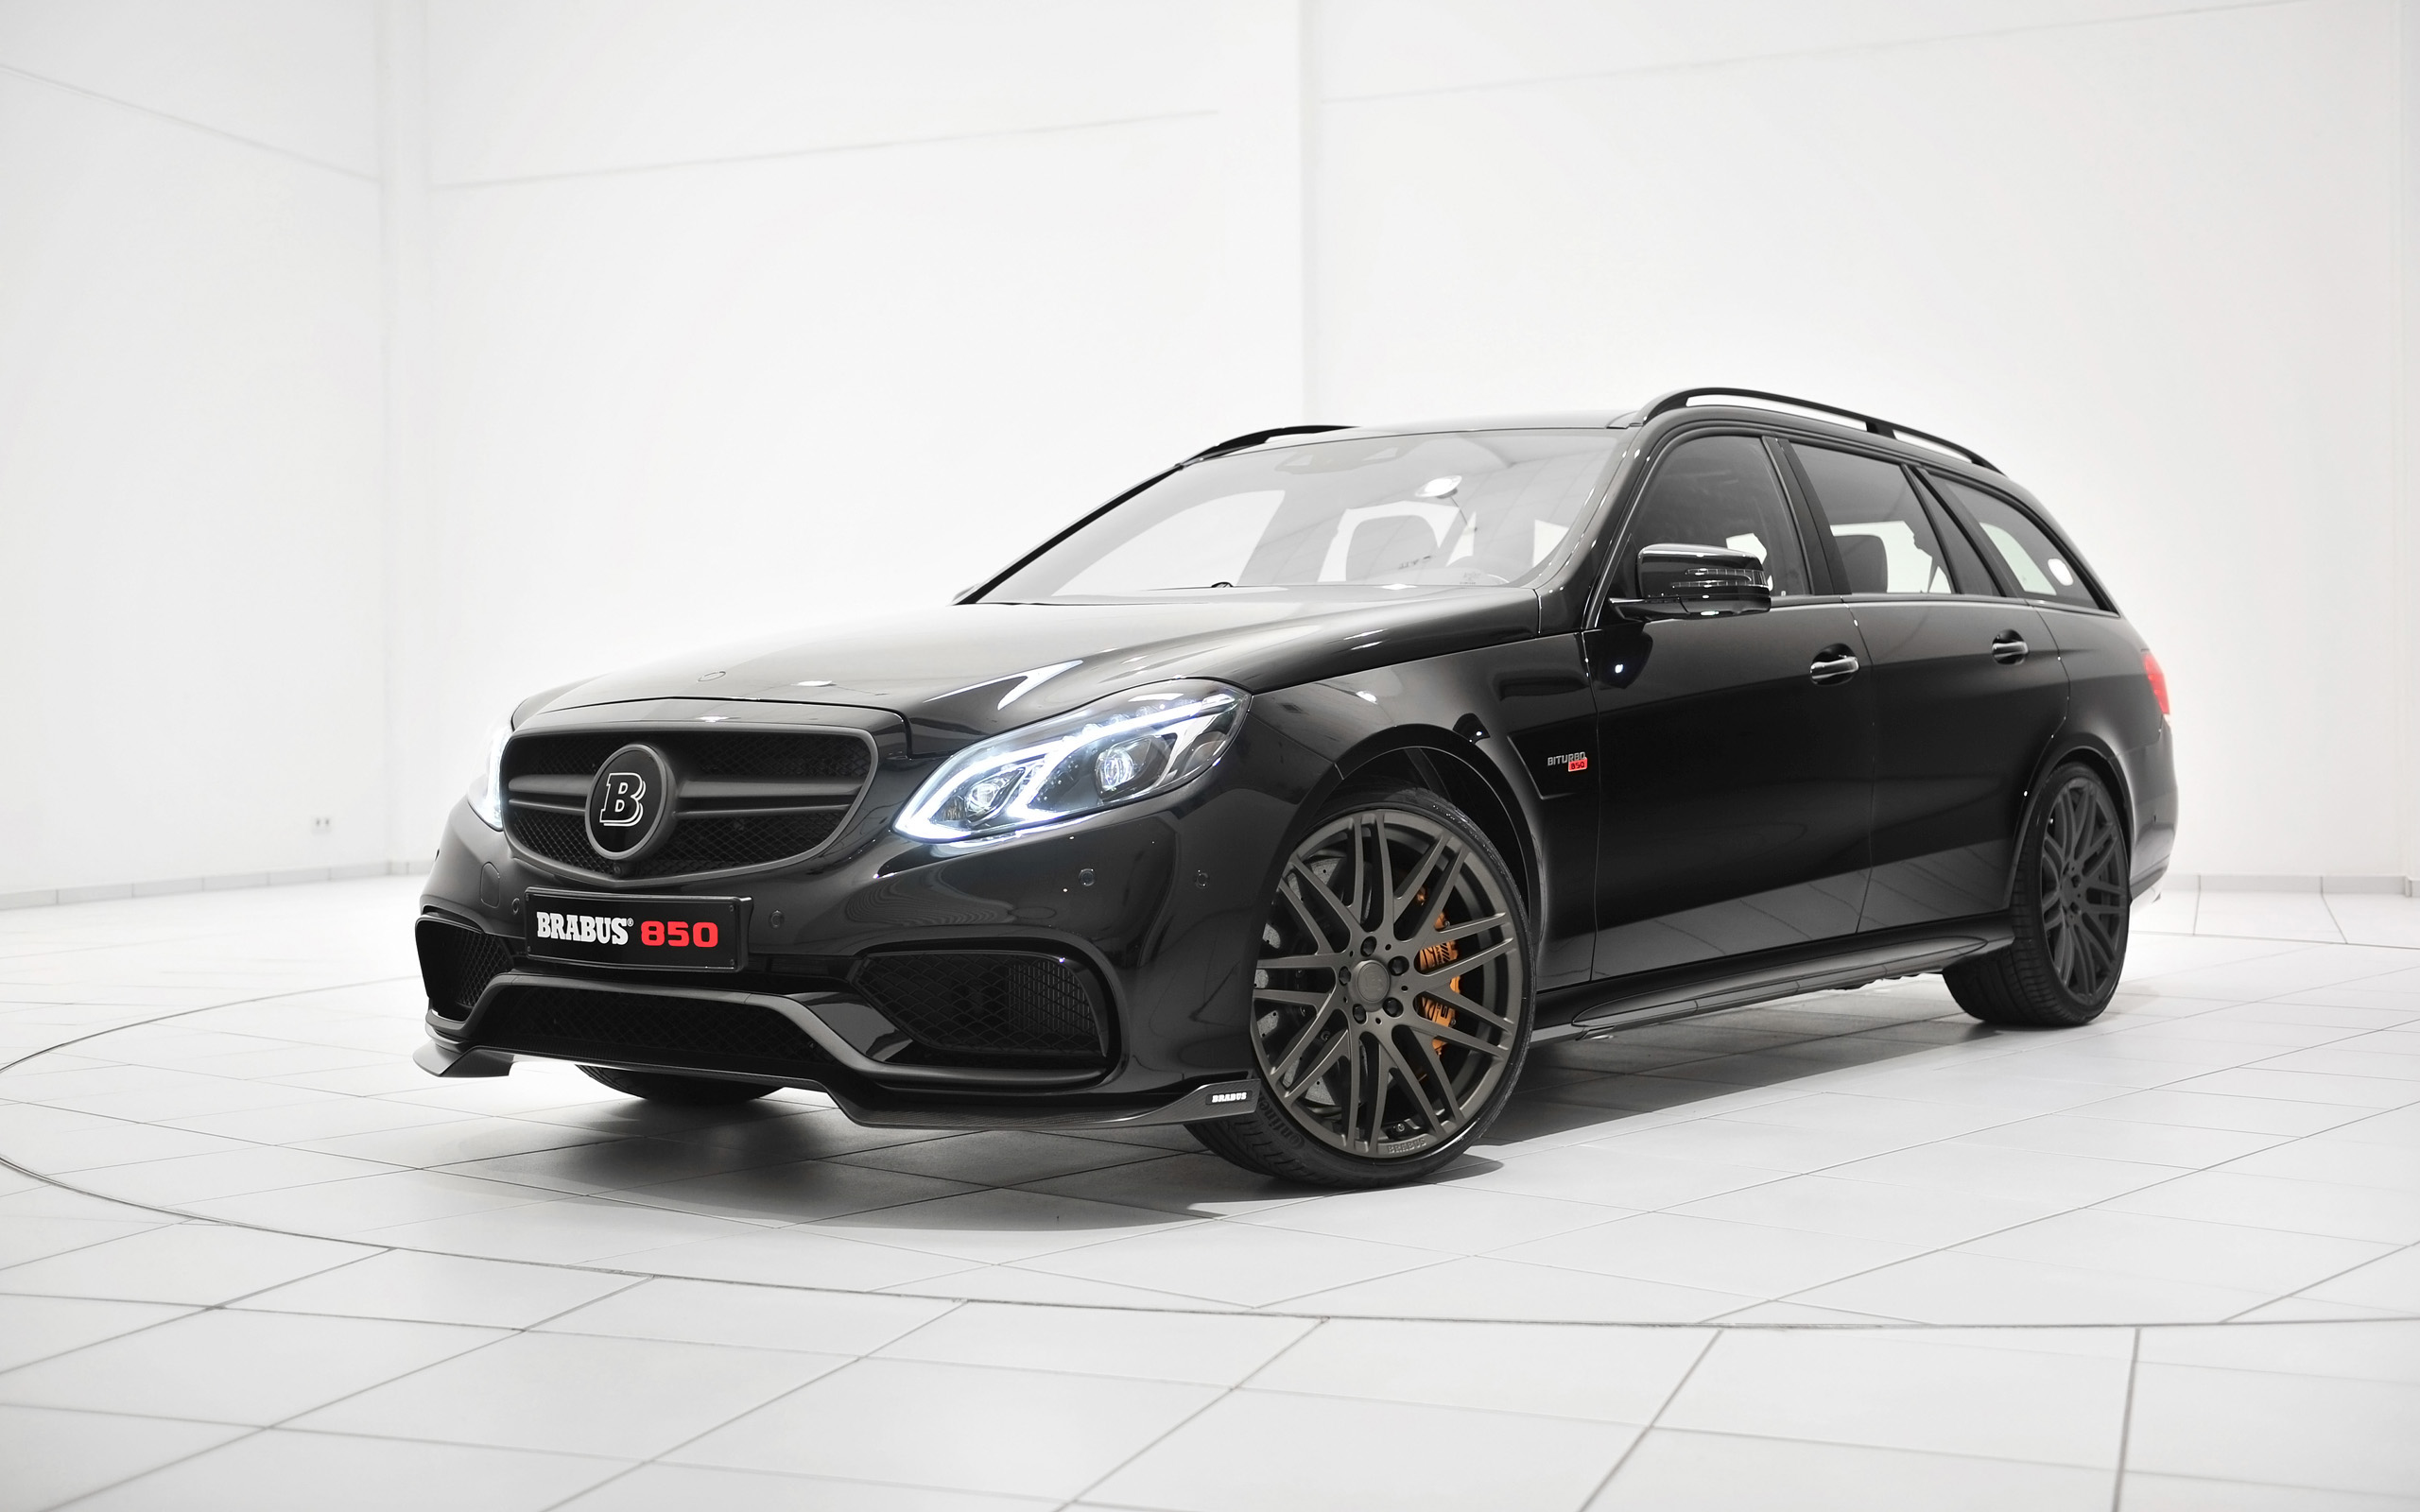 14 Brabus Mercedes Benz E63 Amg Stationwagon Tuning Wallpapers Hd Desktop And Mobile Backgrounds